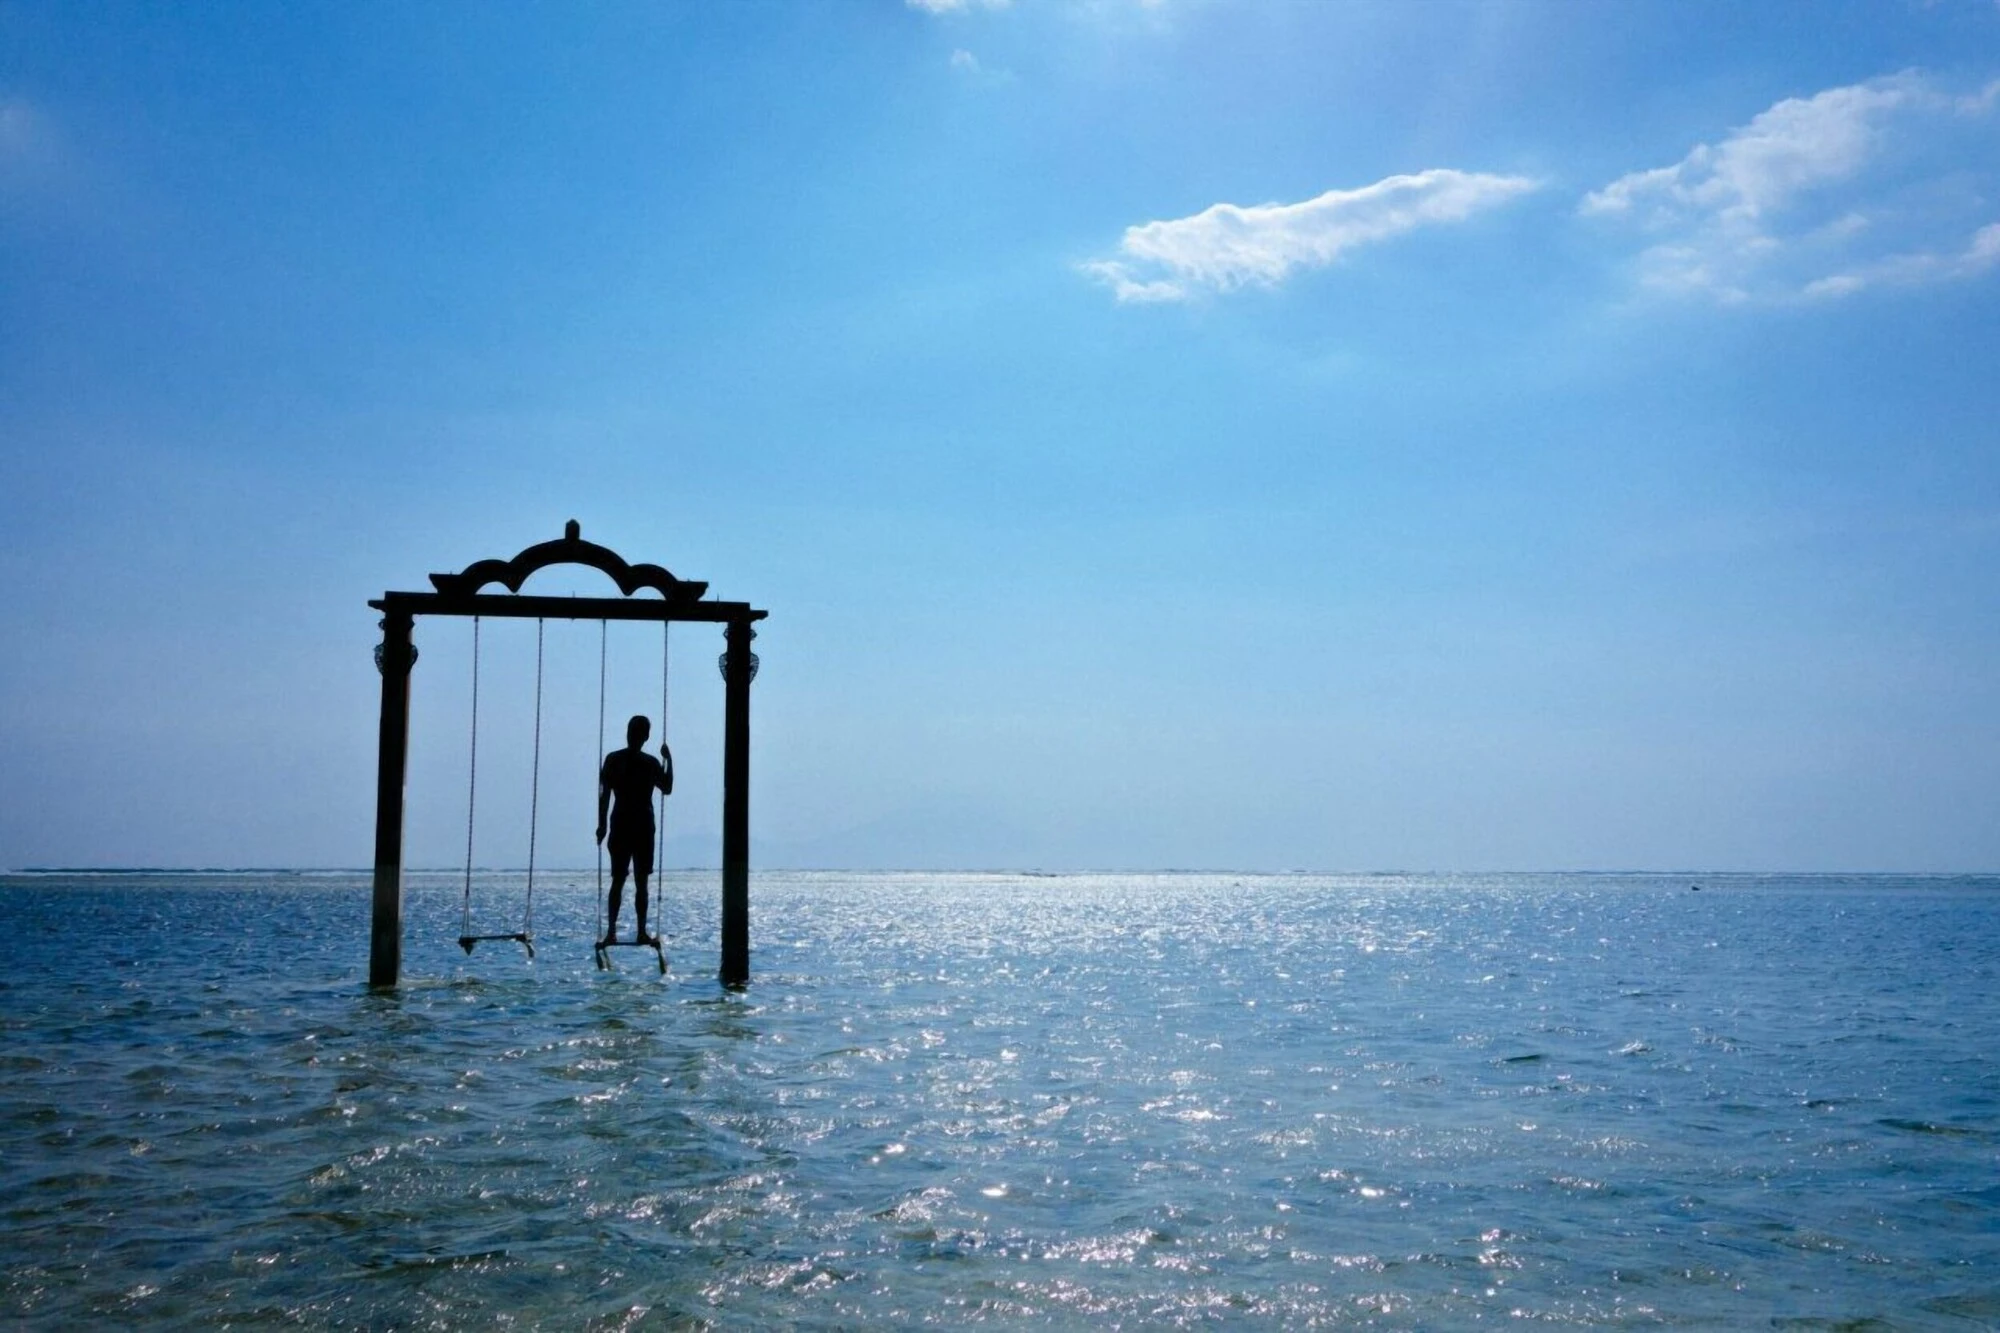 Paradise on Earth: Exploring the Gili Trawangan - An Island Where There Are No Cars